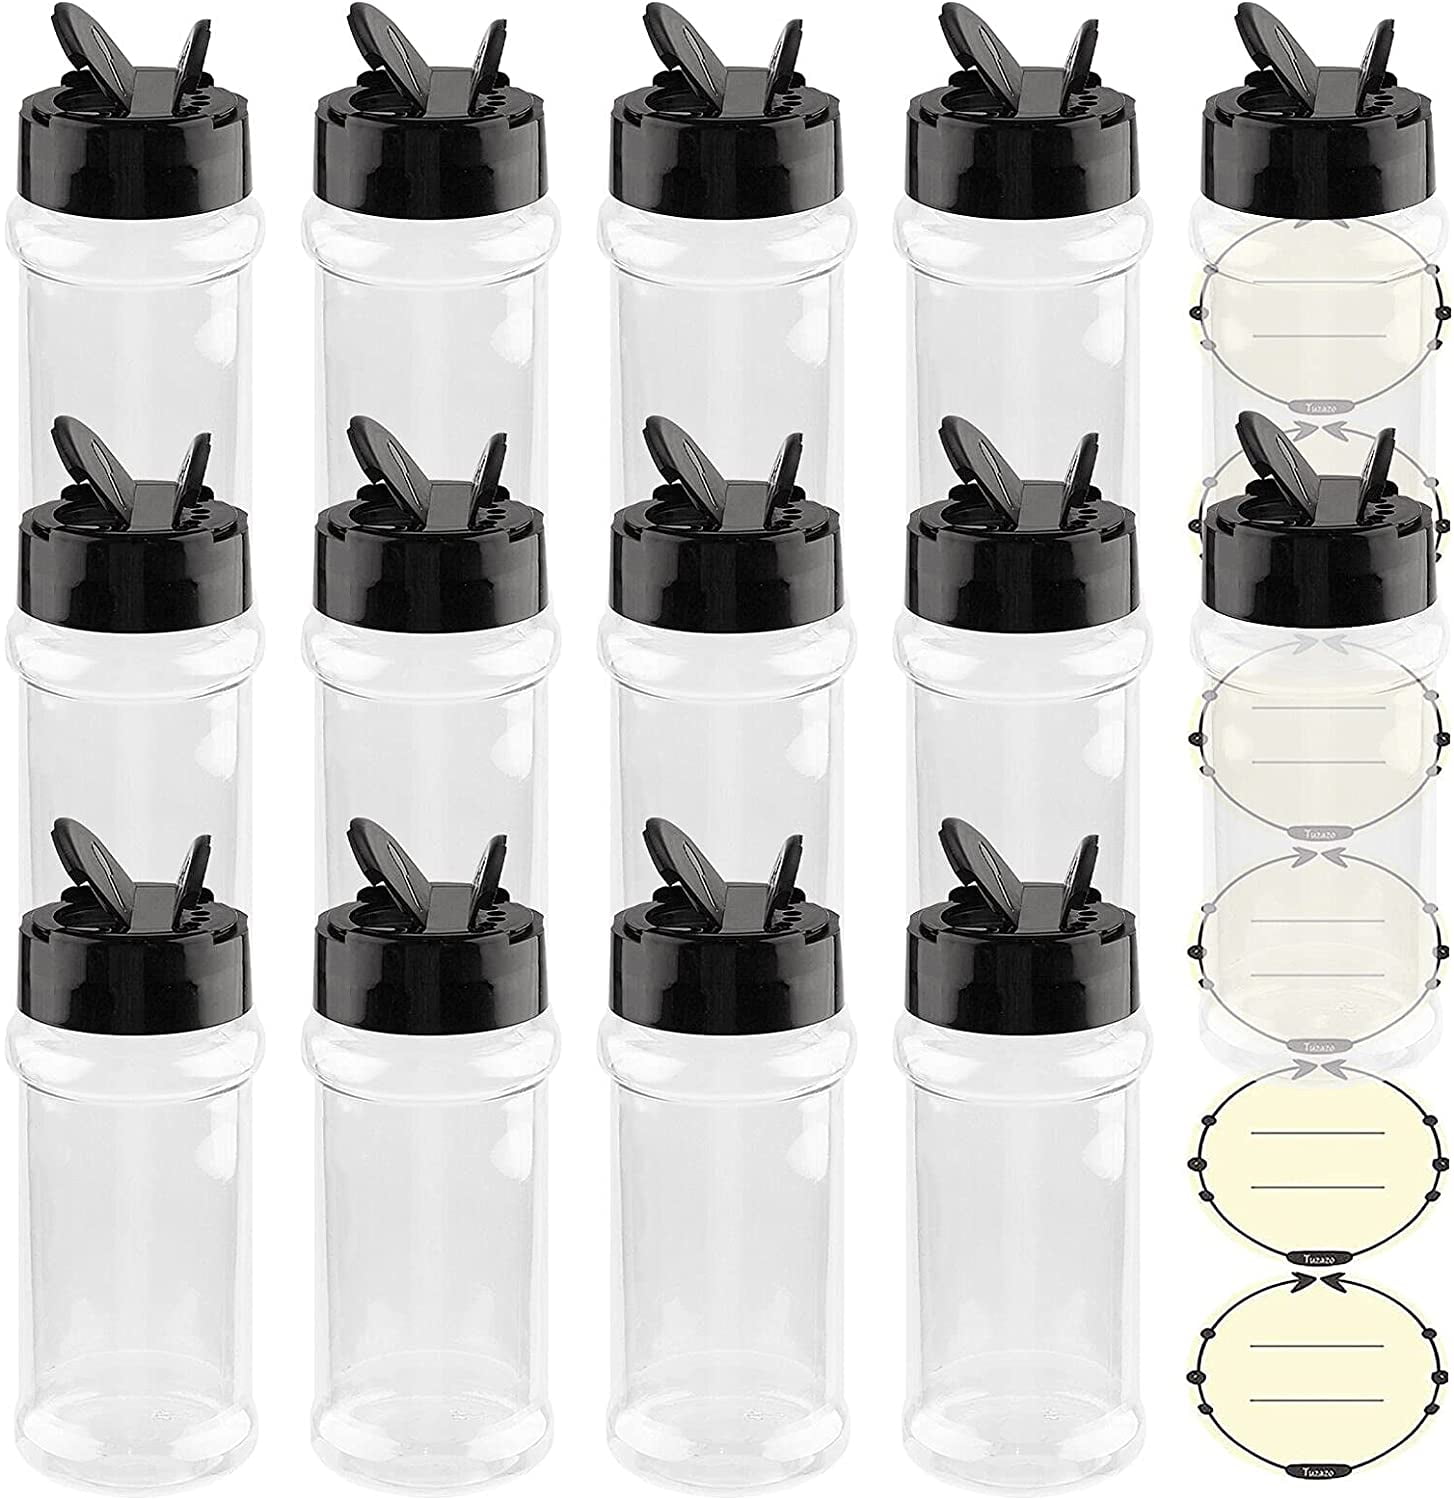 Herbs and Powders 5.7oz/170ml 12 Pcs Clear Plastic Spice Jars Storage Container Bottle Containers with Black Cap Perfect for Storing Spice 